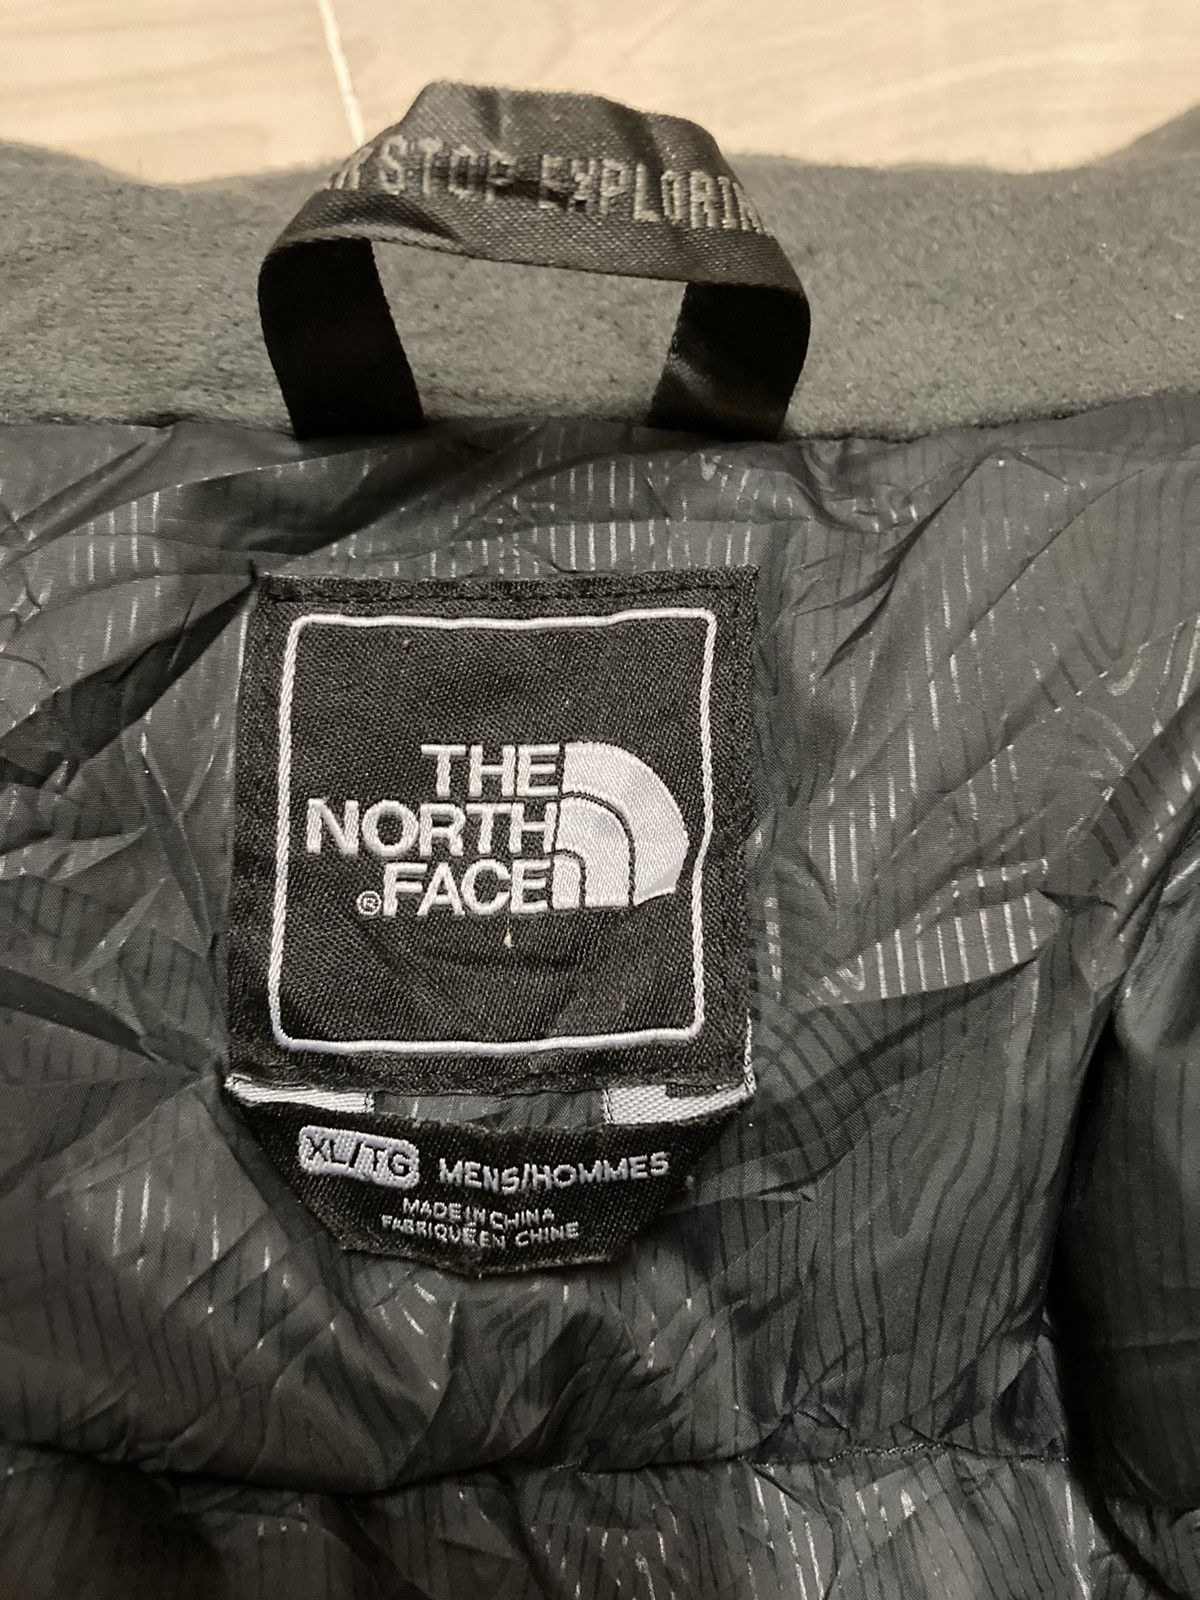 The North Face Hyvent TNF NSE F07 Parka Down Jacket - 17